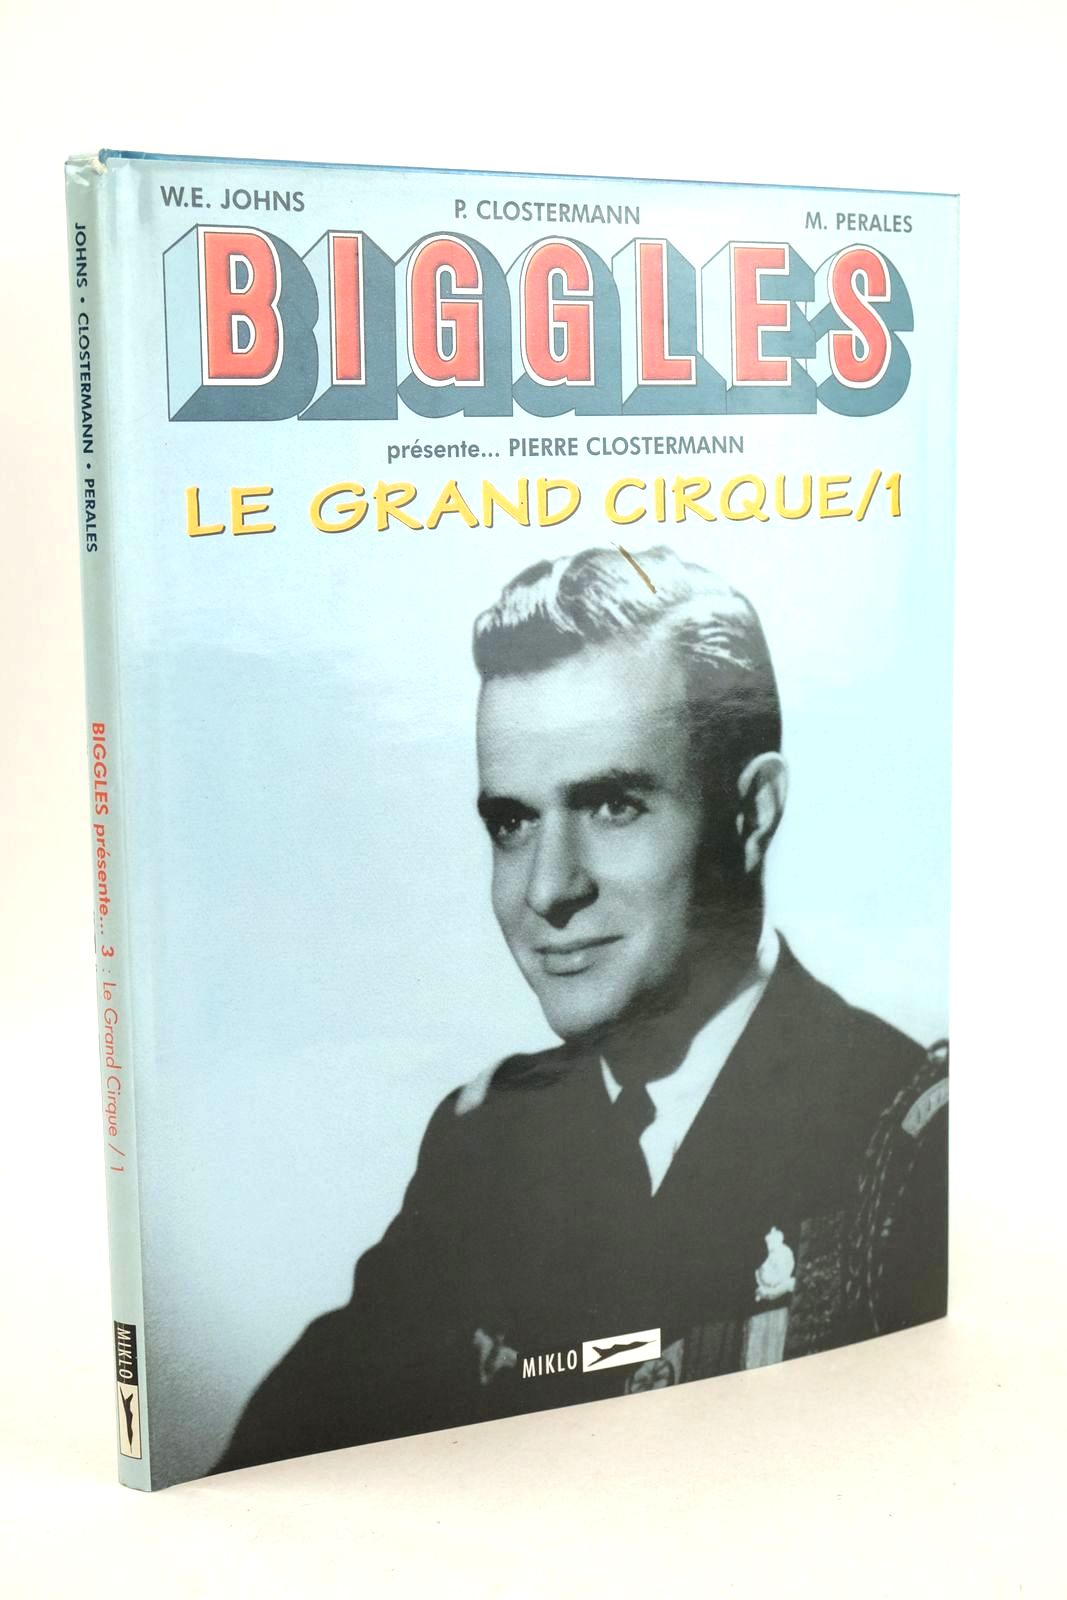 Photo of BIGGLES PRESENTE... LE GRAND CIRQUE /1 OCTOBRE 1942 - DECEMBRE 1943 written by Johns, W.E. Clostermann, Pierre Perales, Manuel illustrated by Perales, Manuel published by Miklo (STOCK CODE: 1326322)  for sale by Stella & Rose's Books